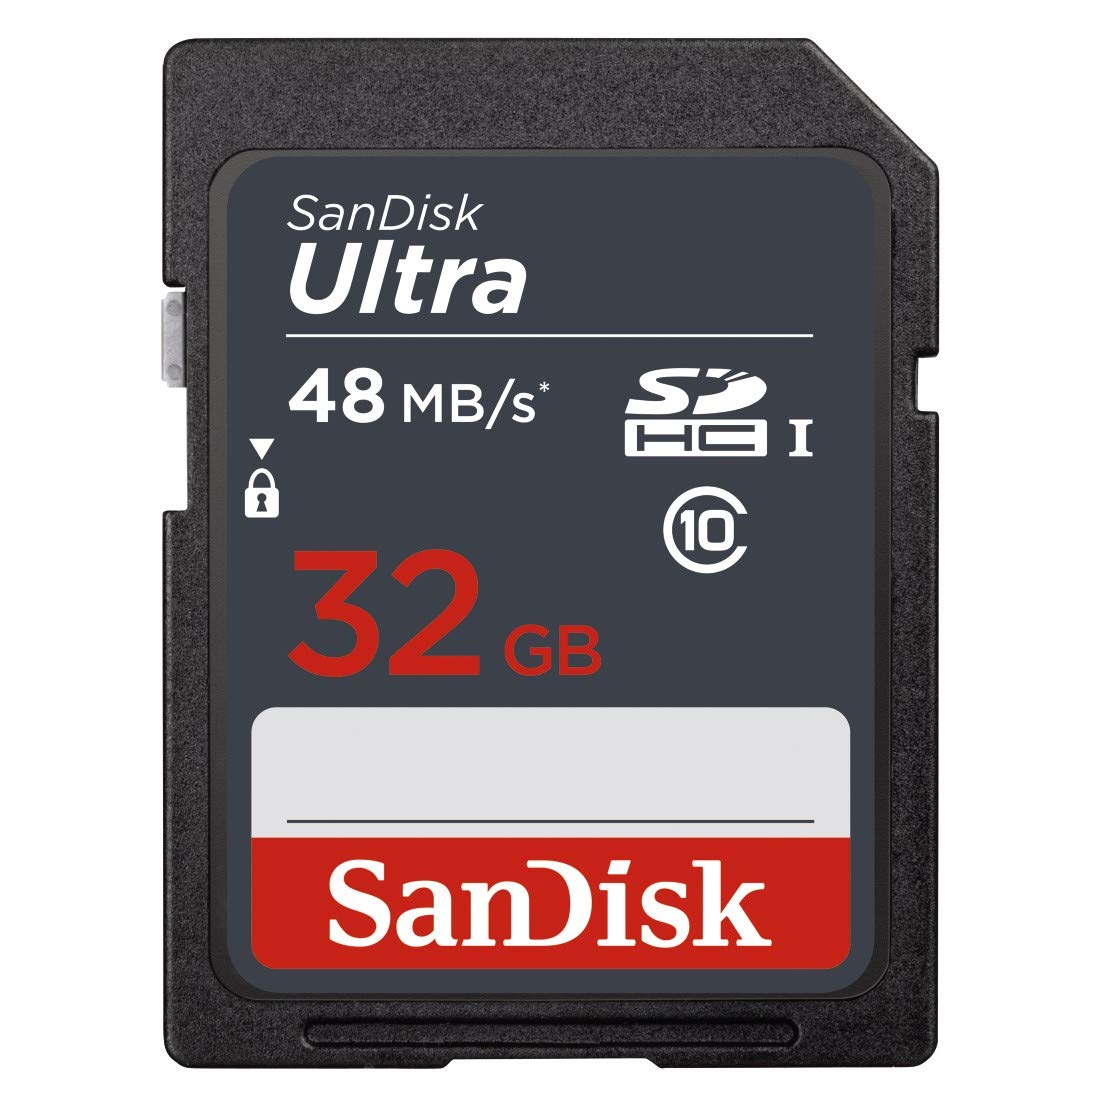 Sandisk Ultra 32gb SDHC Class 10 48mb/s Memory Card - The Camerashop